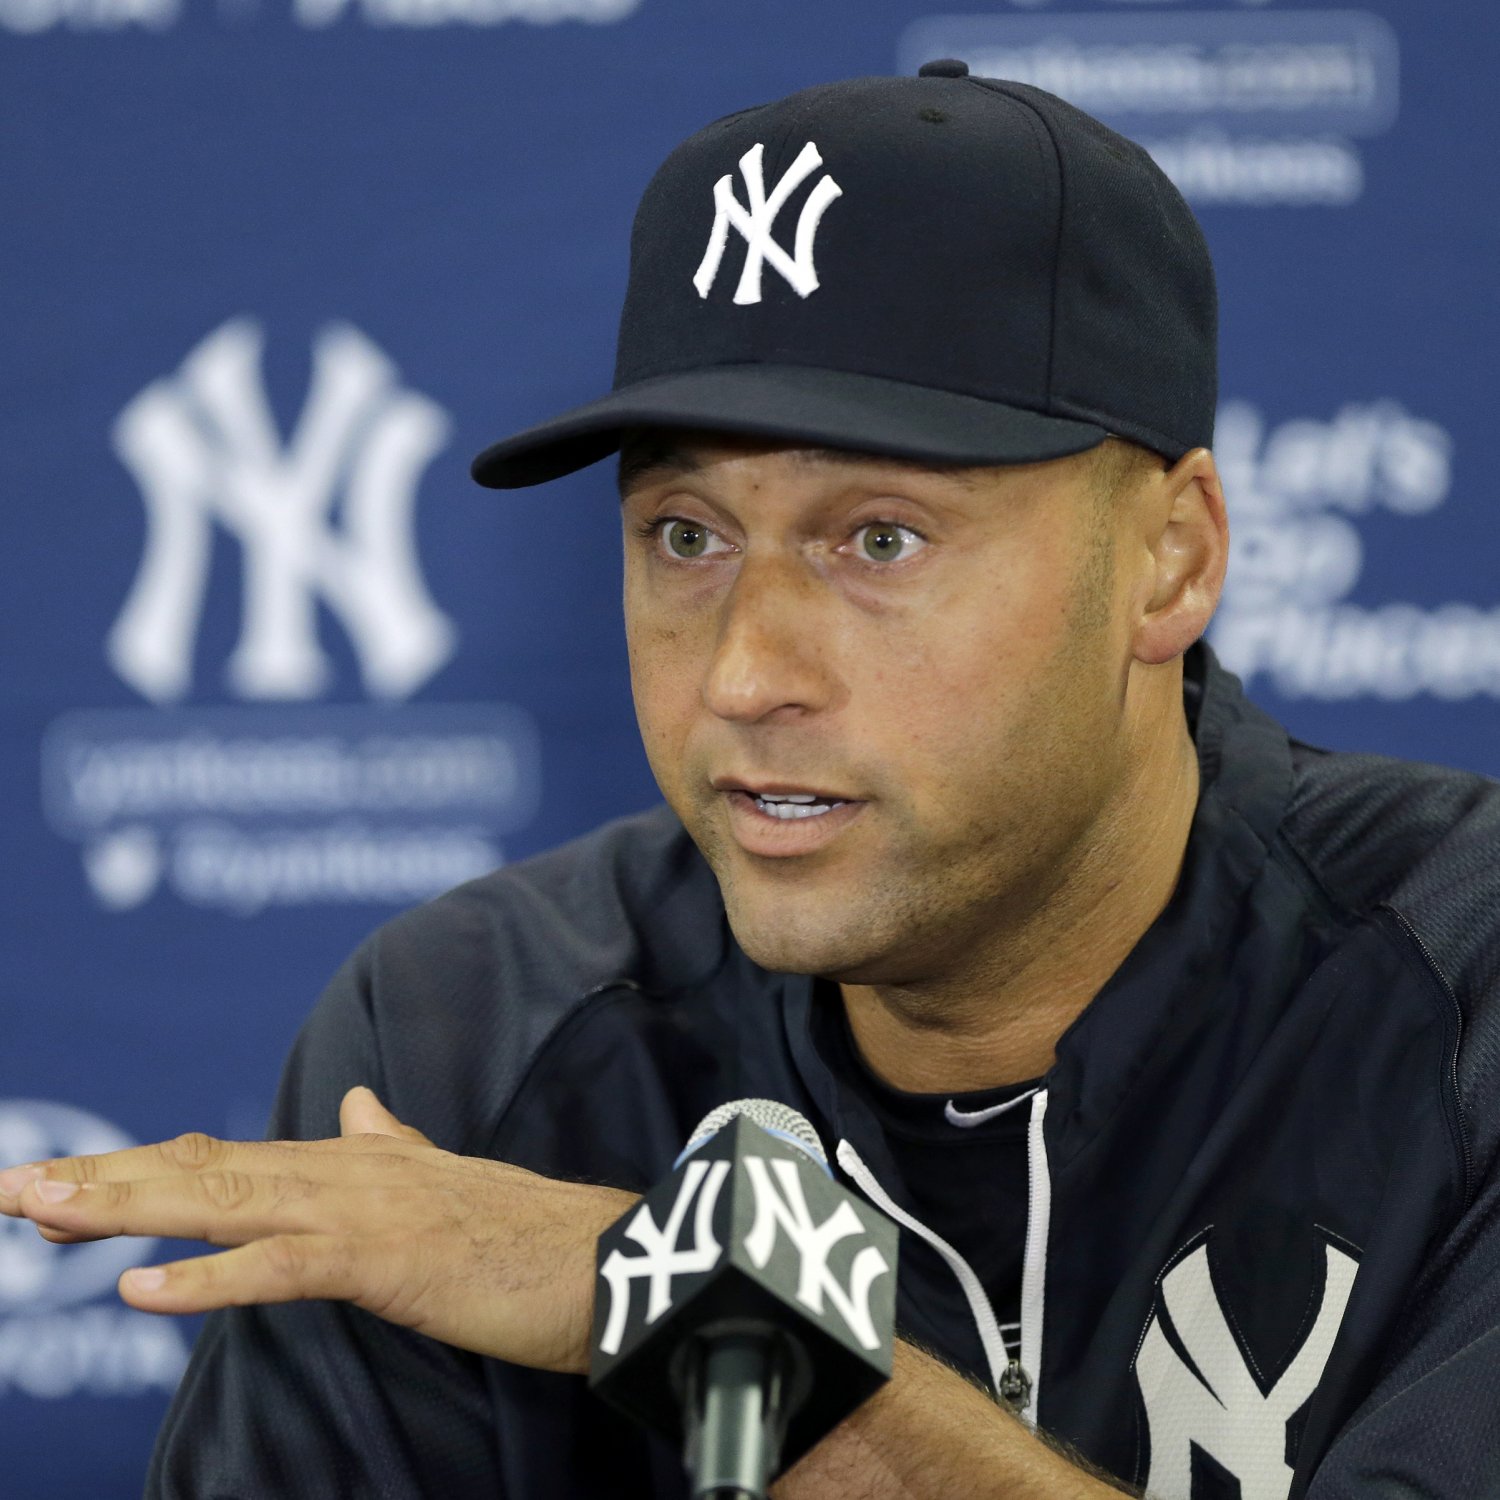 Key Quotes, Takeaways from Derek Jeter's Retirement Press Conference ...